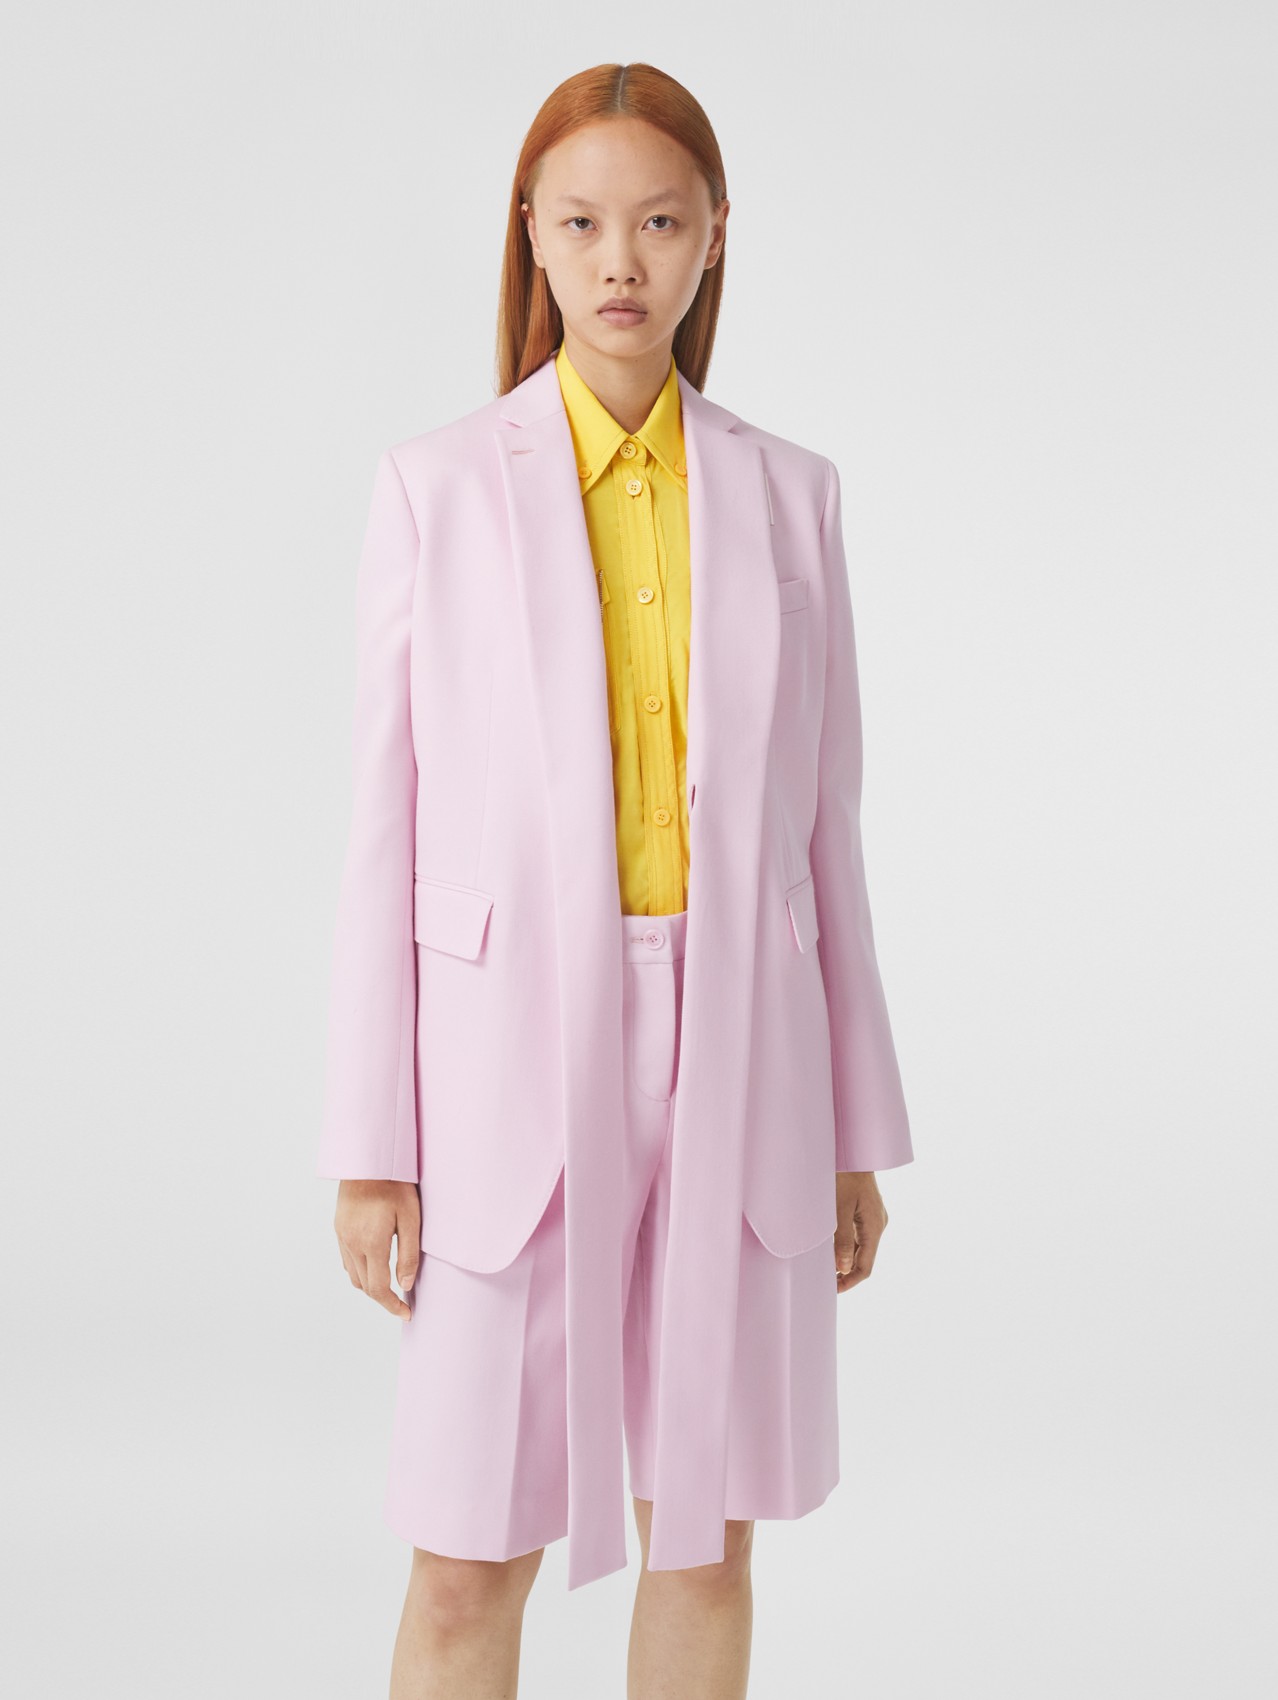 Exaggerated Lapel Wool Twill Tailored Jacket in Pale Candy Pink